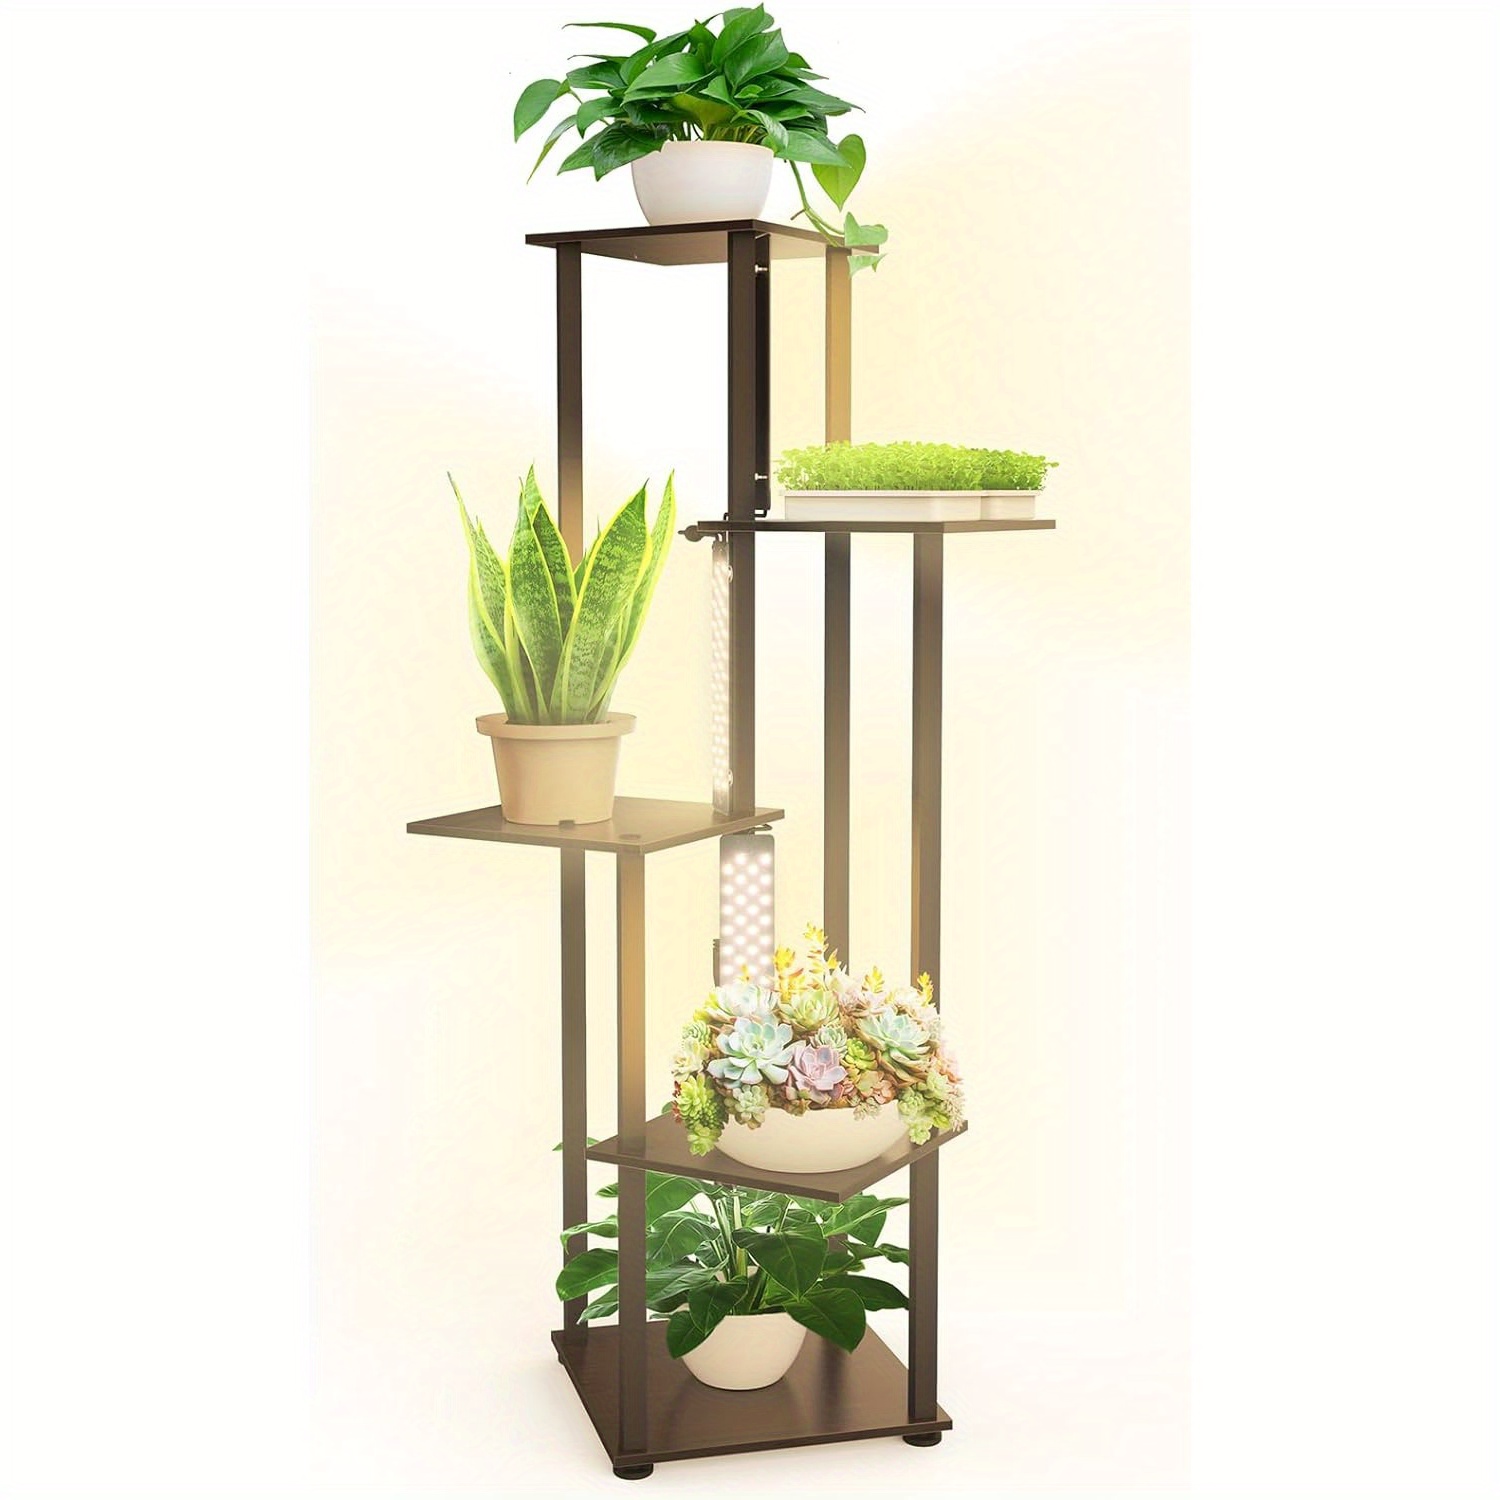 

Plant Stand With Grow Lights Full Spectrum, 5 Tier Potted Corner Plant Shelf With Grow Lights Panel, Dimmable 24w (3 X 8w) Led Plant Light With Timer For Patio Garden, Living Room